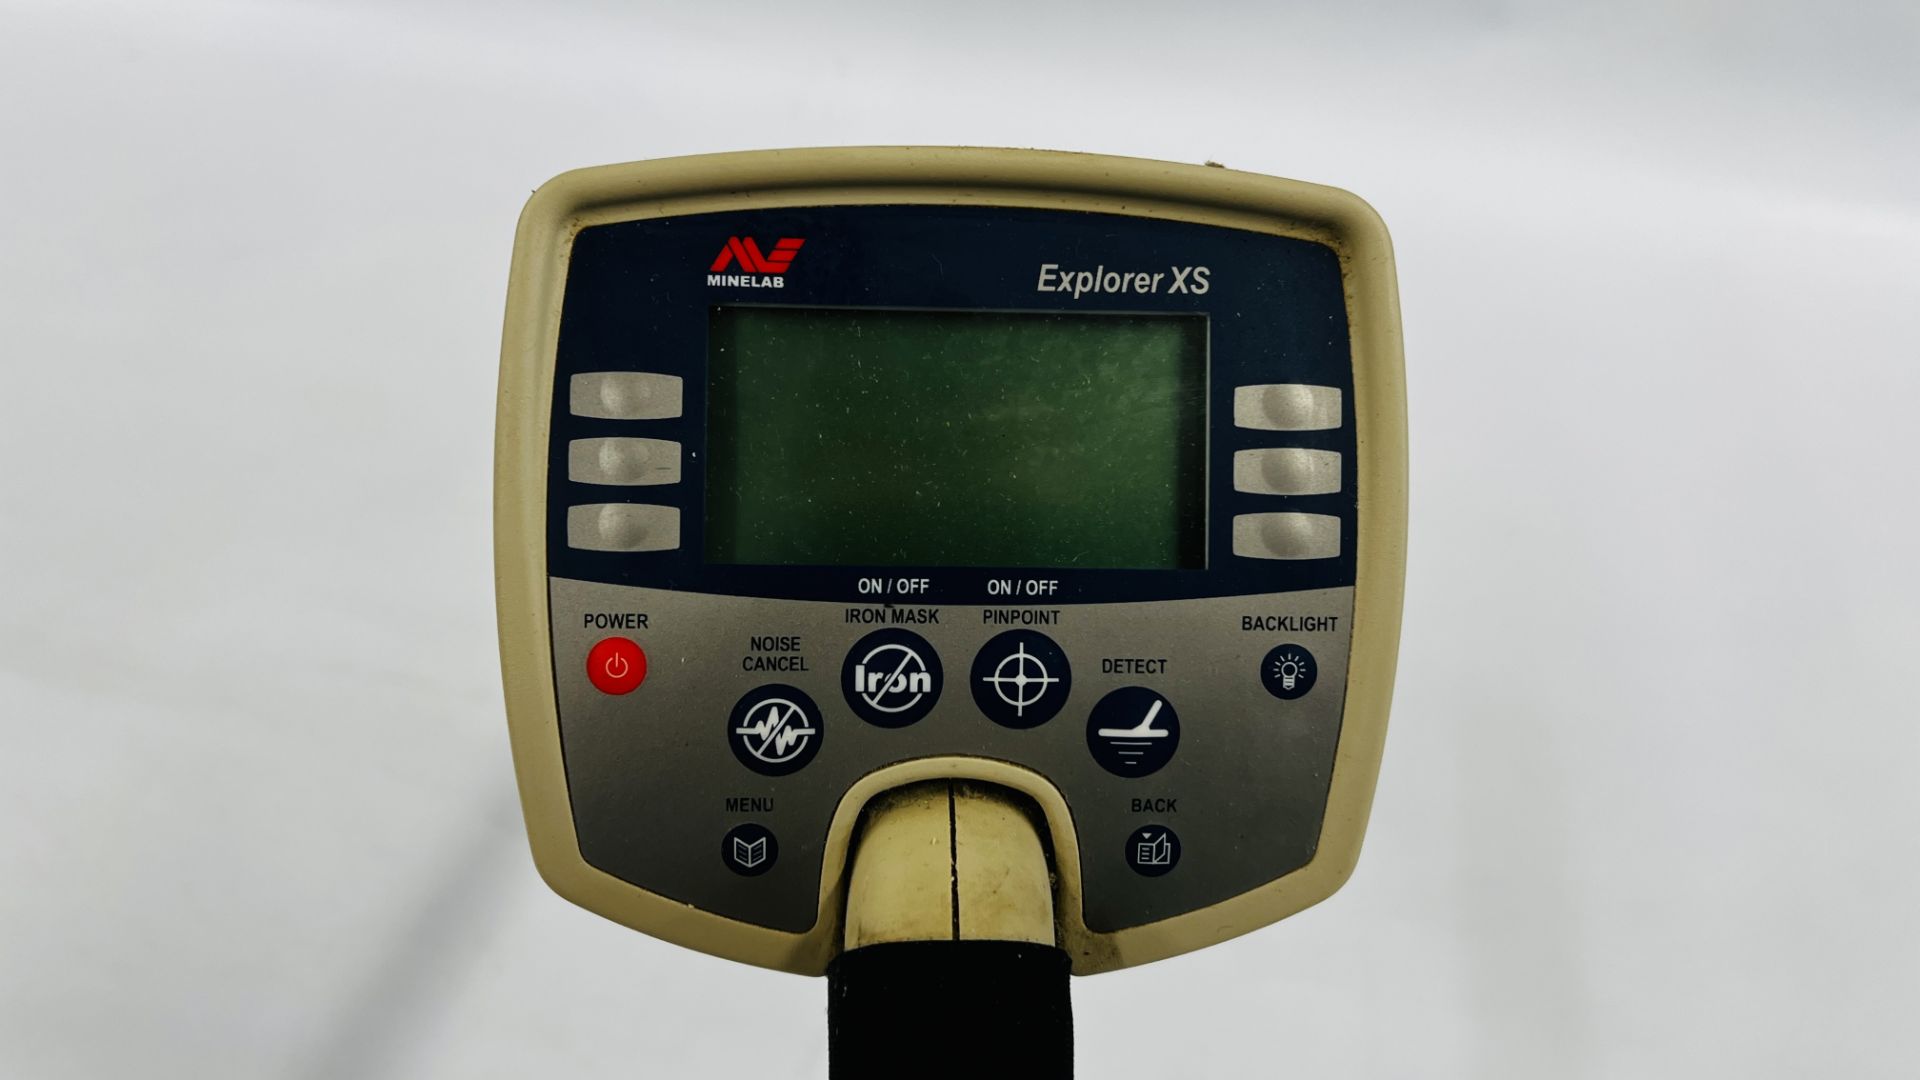 AN EXPLORER NUMINELAB FULL BAND SPECTRUM TECHNOLOGY METAL DETECTOR. - Image 4 of 6